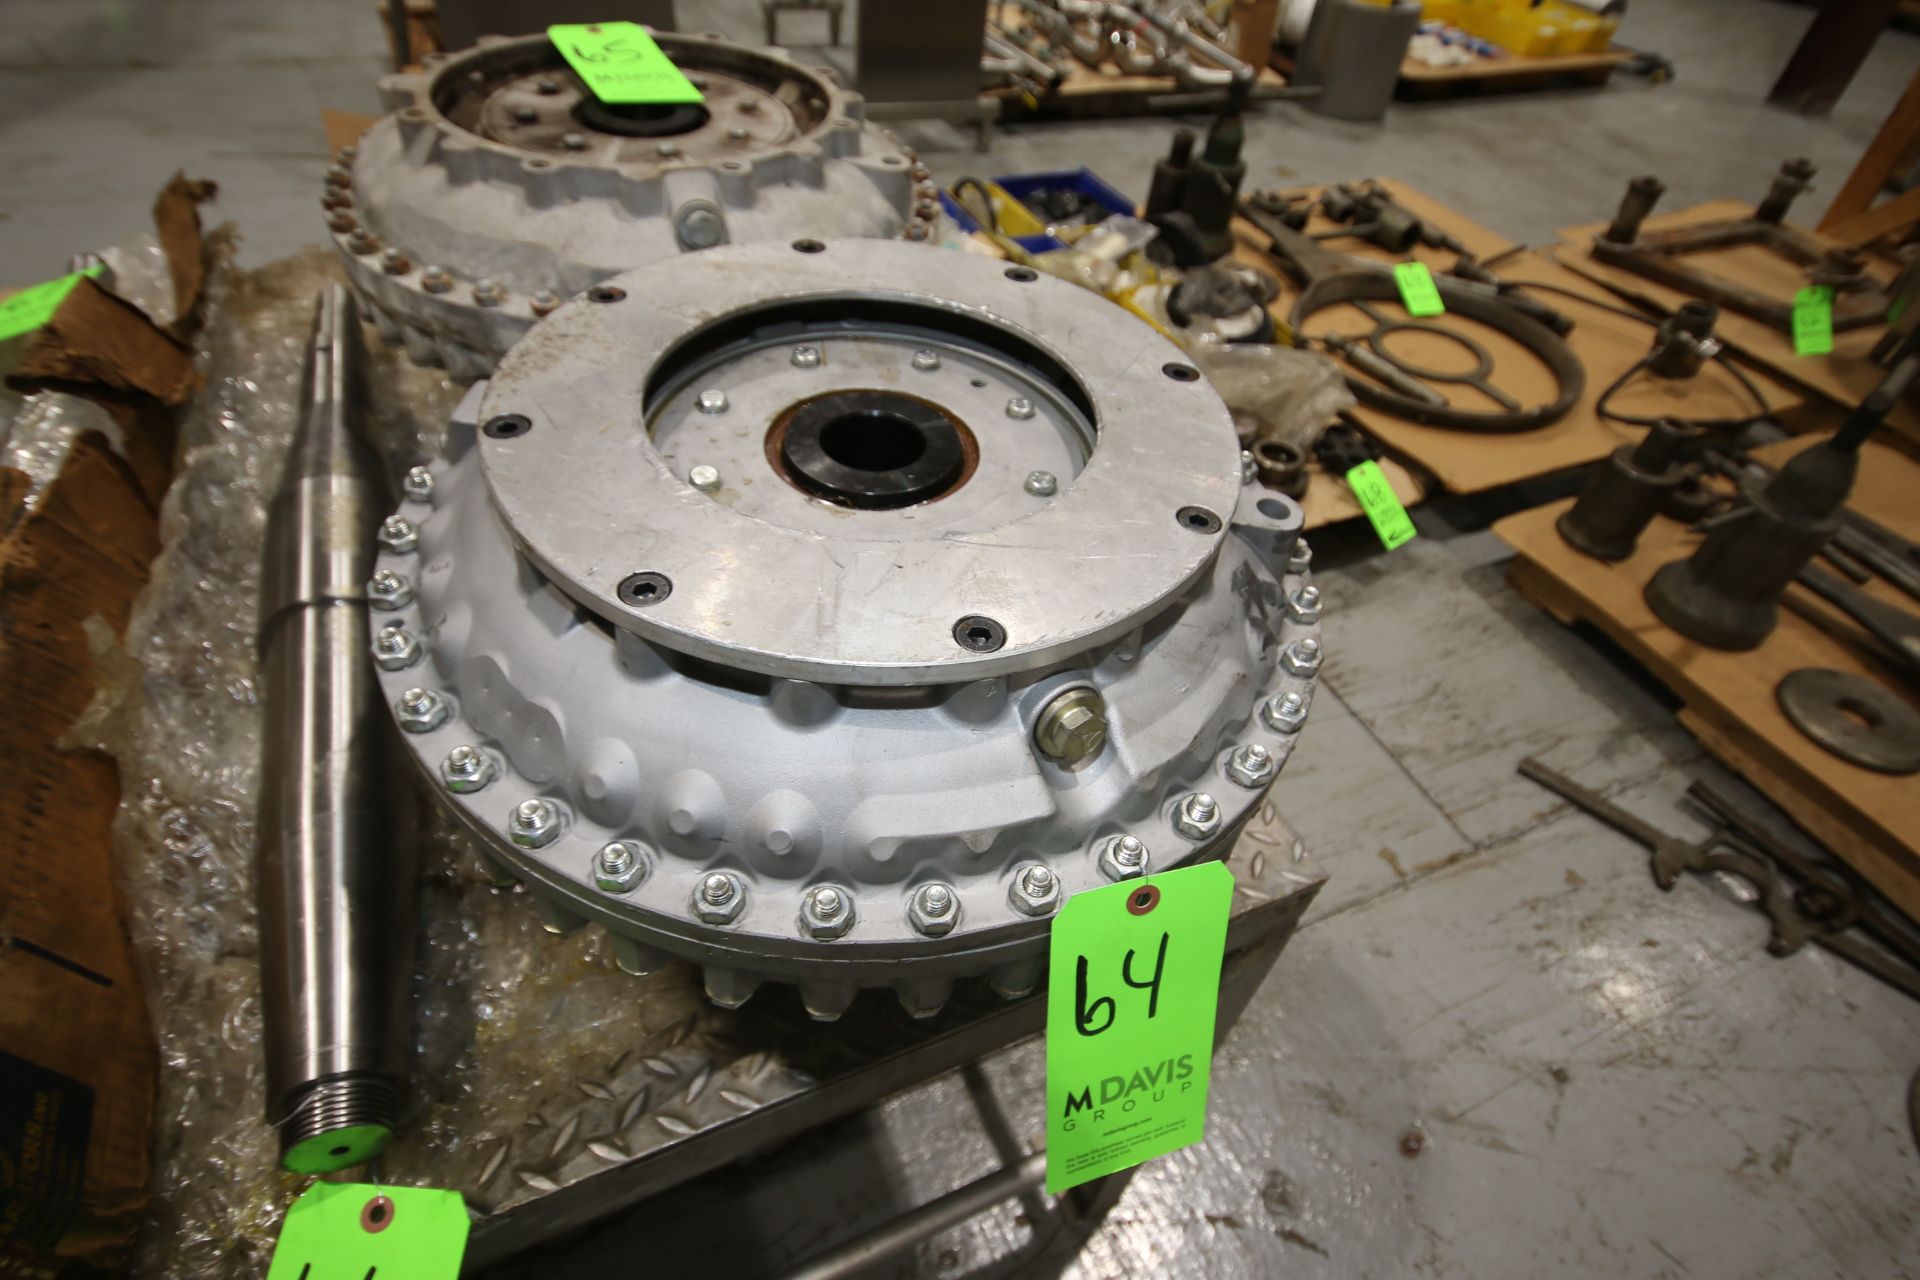 GEA/Westfalia MSB170 and Other Separator/Centrifuge Clutch, Type 422TB, Part #856722 (Note: